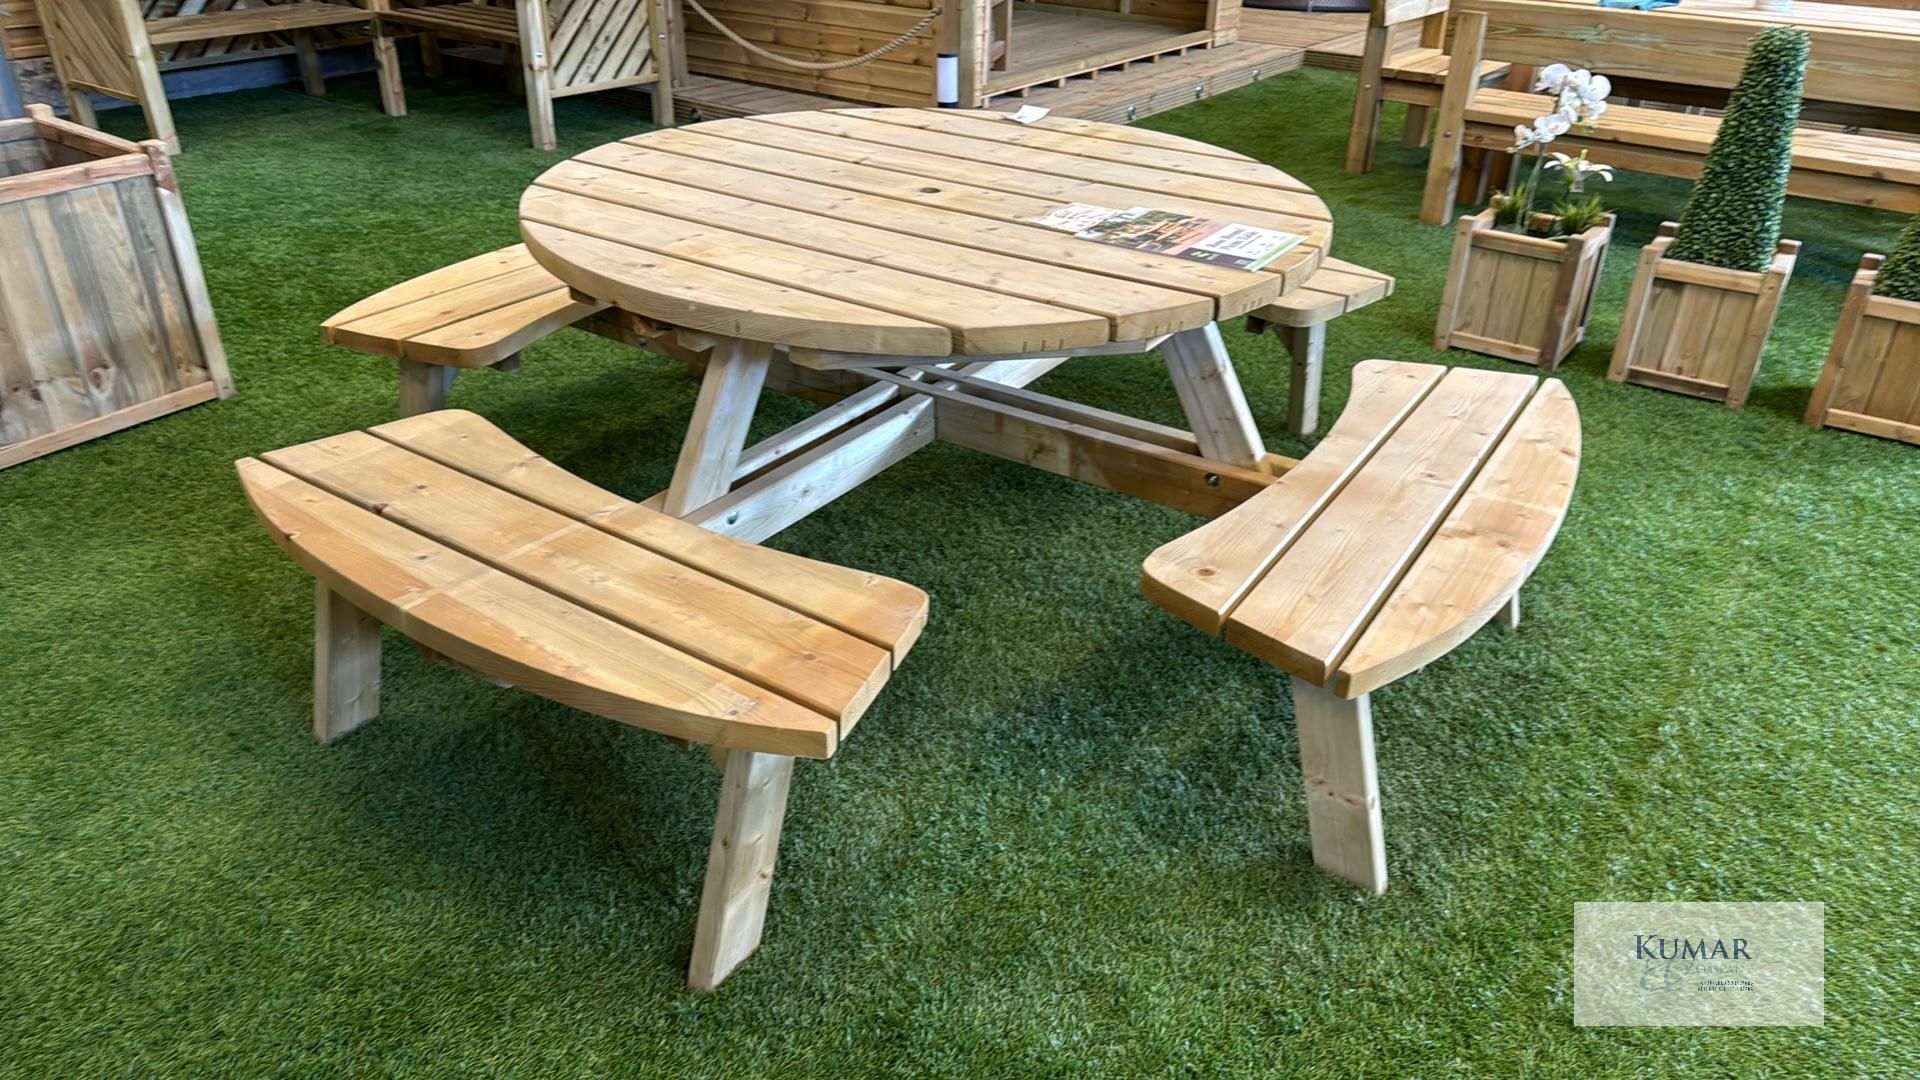 Rose Round Picnic Table w2.10m x h 2.23m, RRP £555.99 - Image 2 of 8